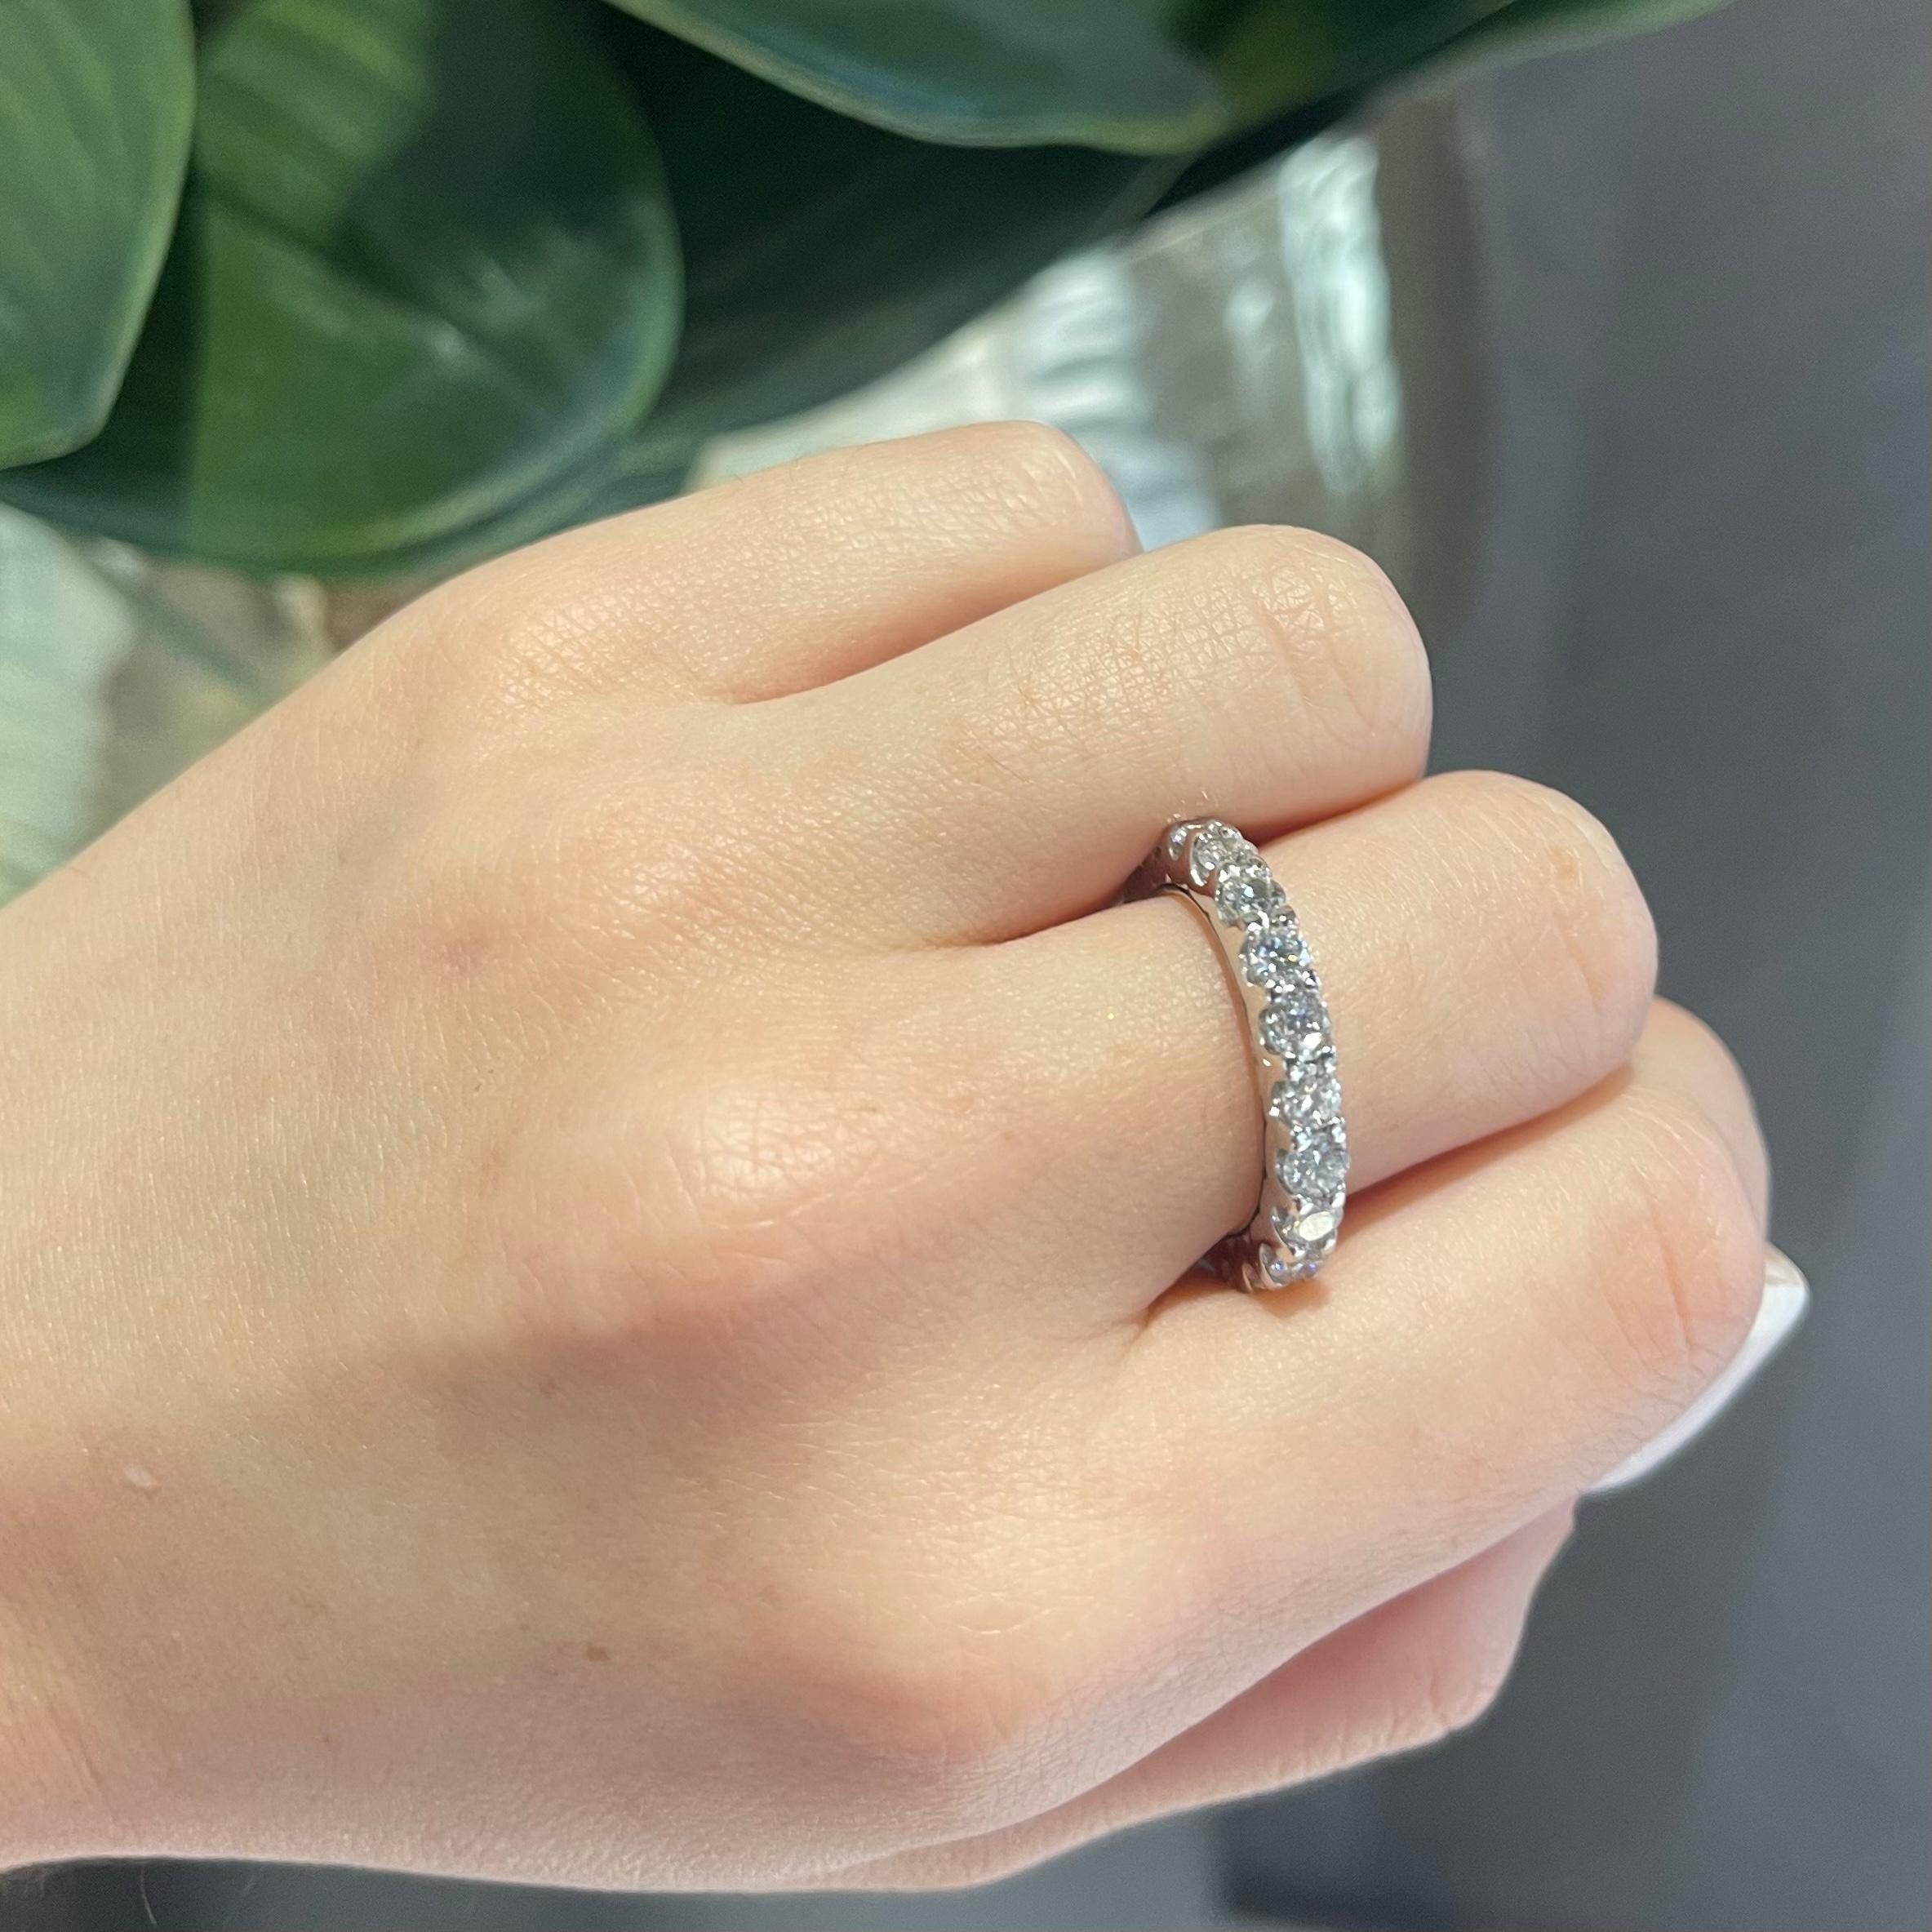 Style: Eternity Wedding Band

Metal: White Gold 

Metal Purity: 14K 

​​​​​​​Stones: Diamonds

Diamond Color: H

Diamond Clarity: I2

Diamond Cut: Brilliant Cut

Diamonds: 21

​​​​​​​Total Carat Weight: 2.3 ct​​​​​​​

Ring Size: 7

Includes: 24